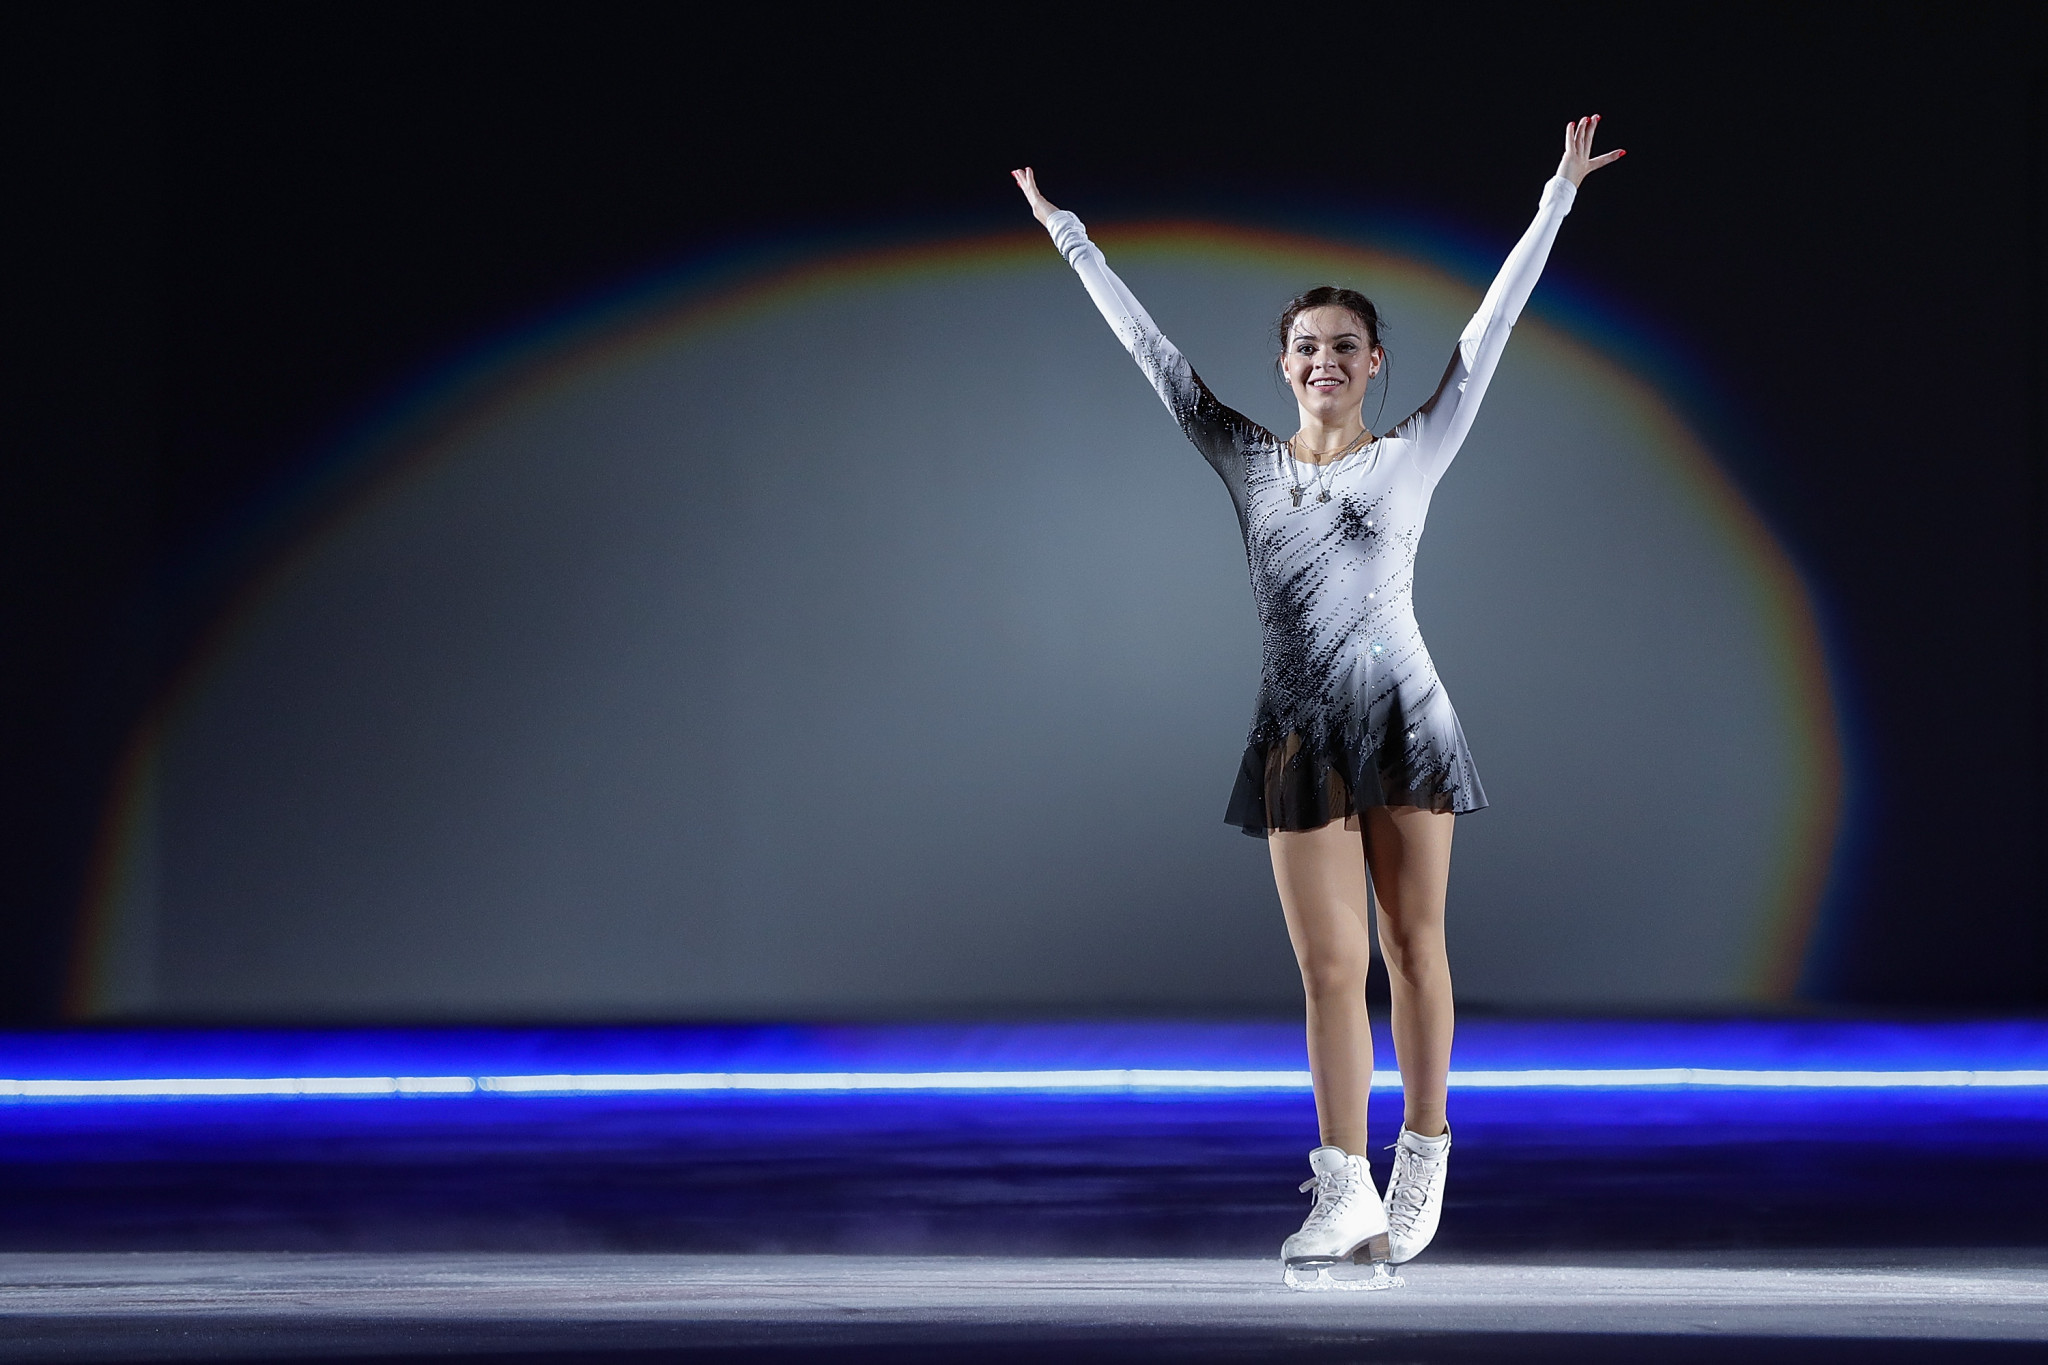 Sochi 2014 Winter Olympic champion Adelina Sotnikova has been revealed as a victim of a fortune-telling scam ©Getty Images